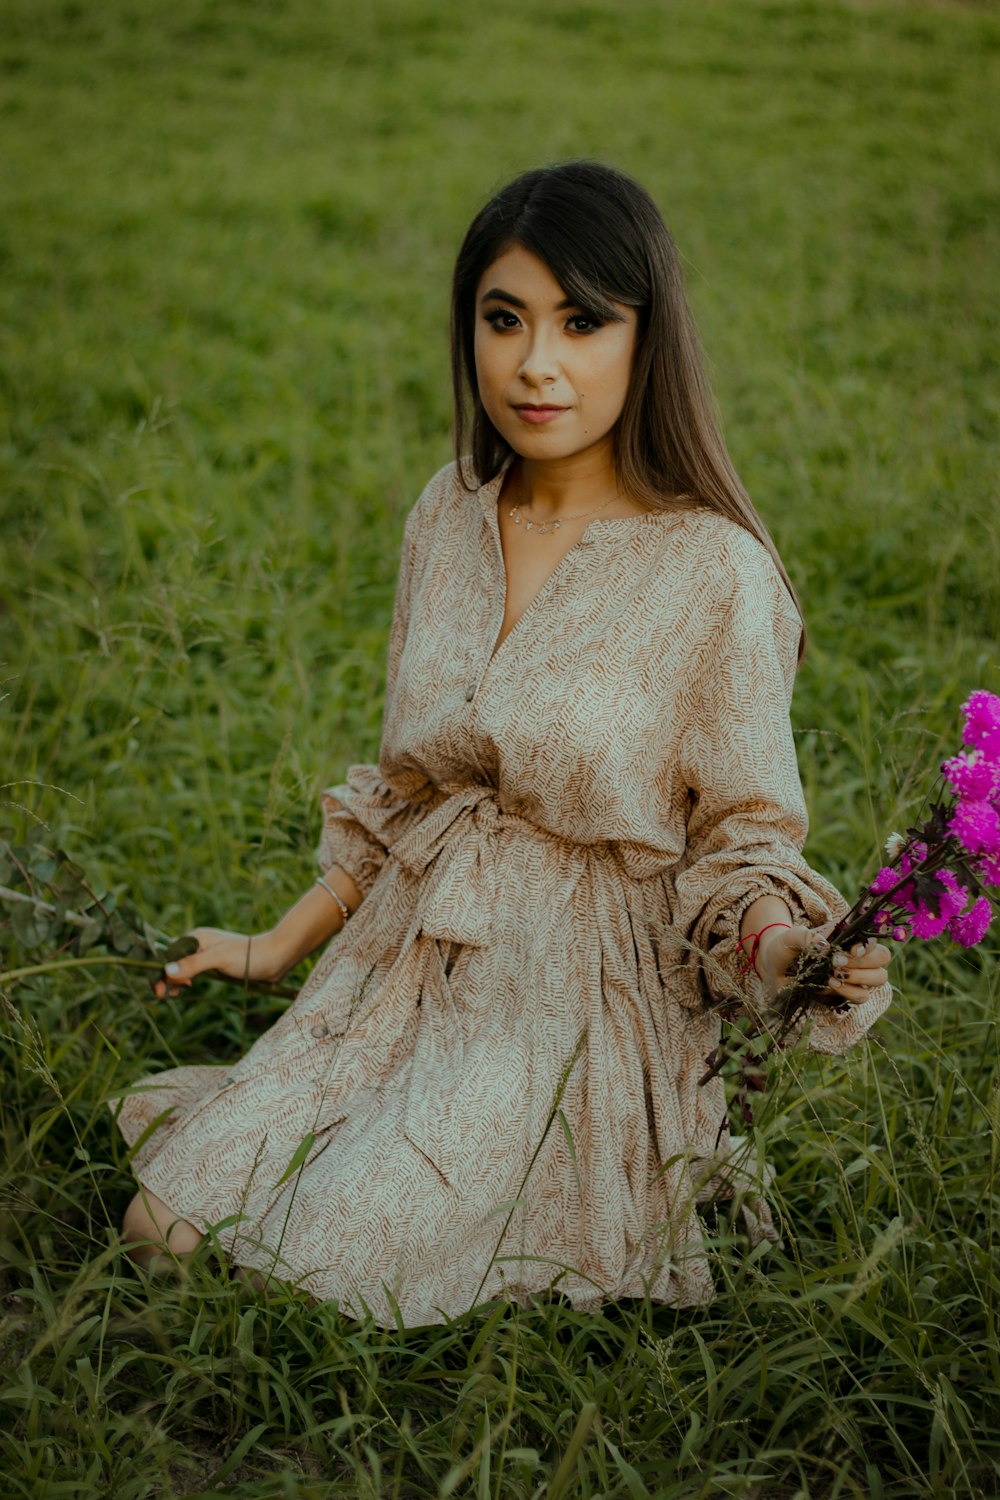 a young girl sitting in a field holding a purple flower